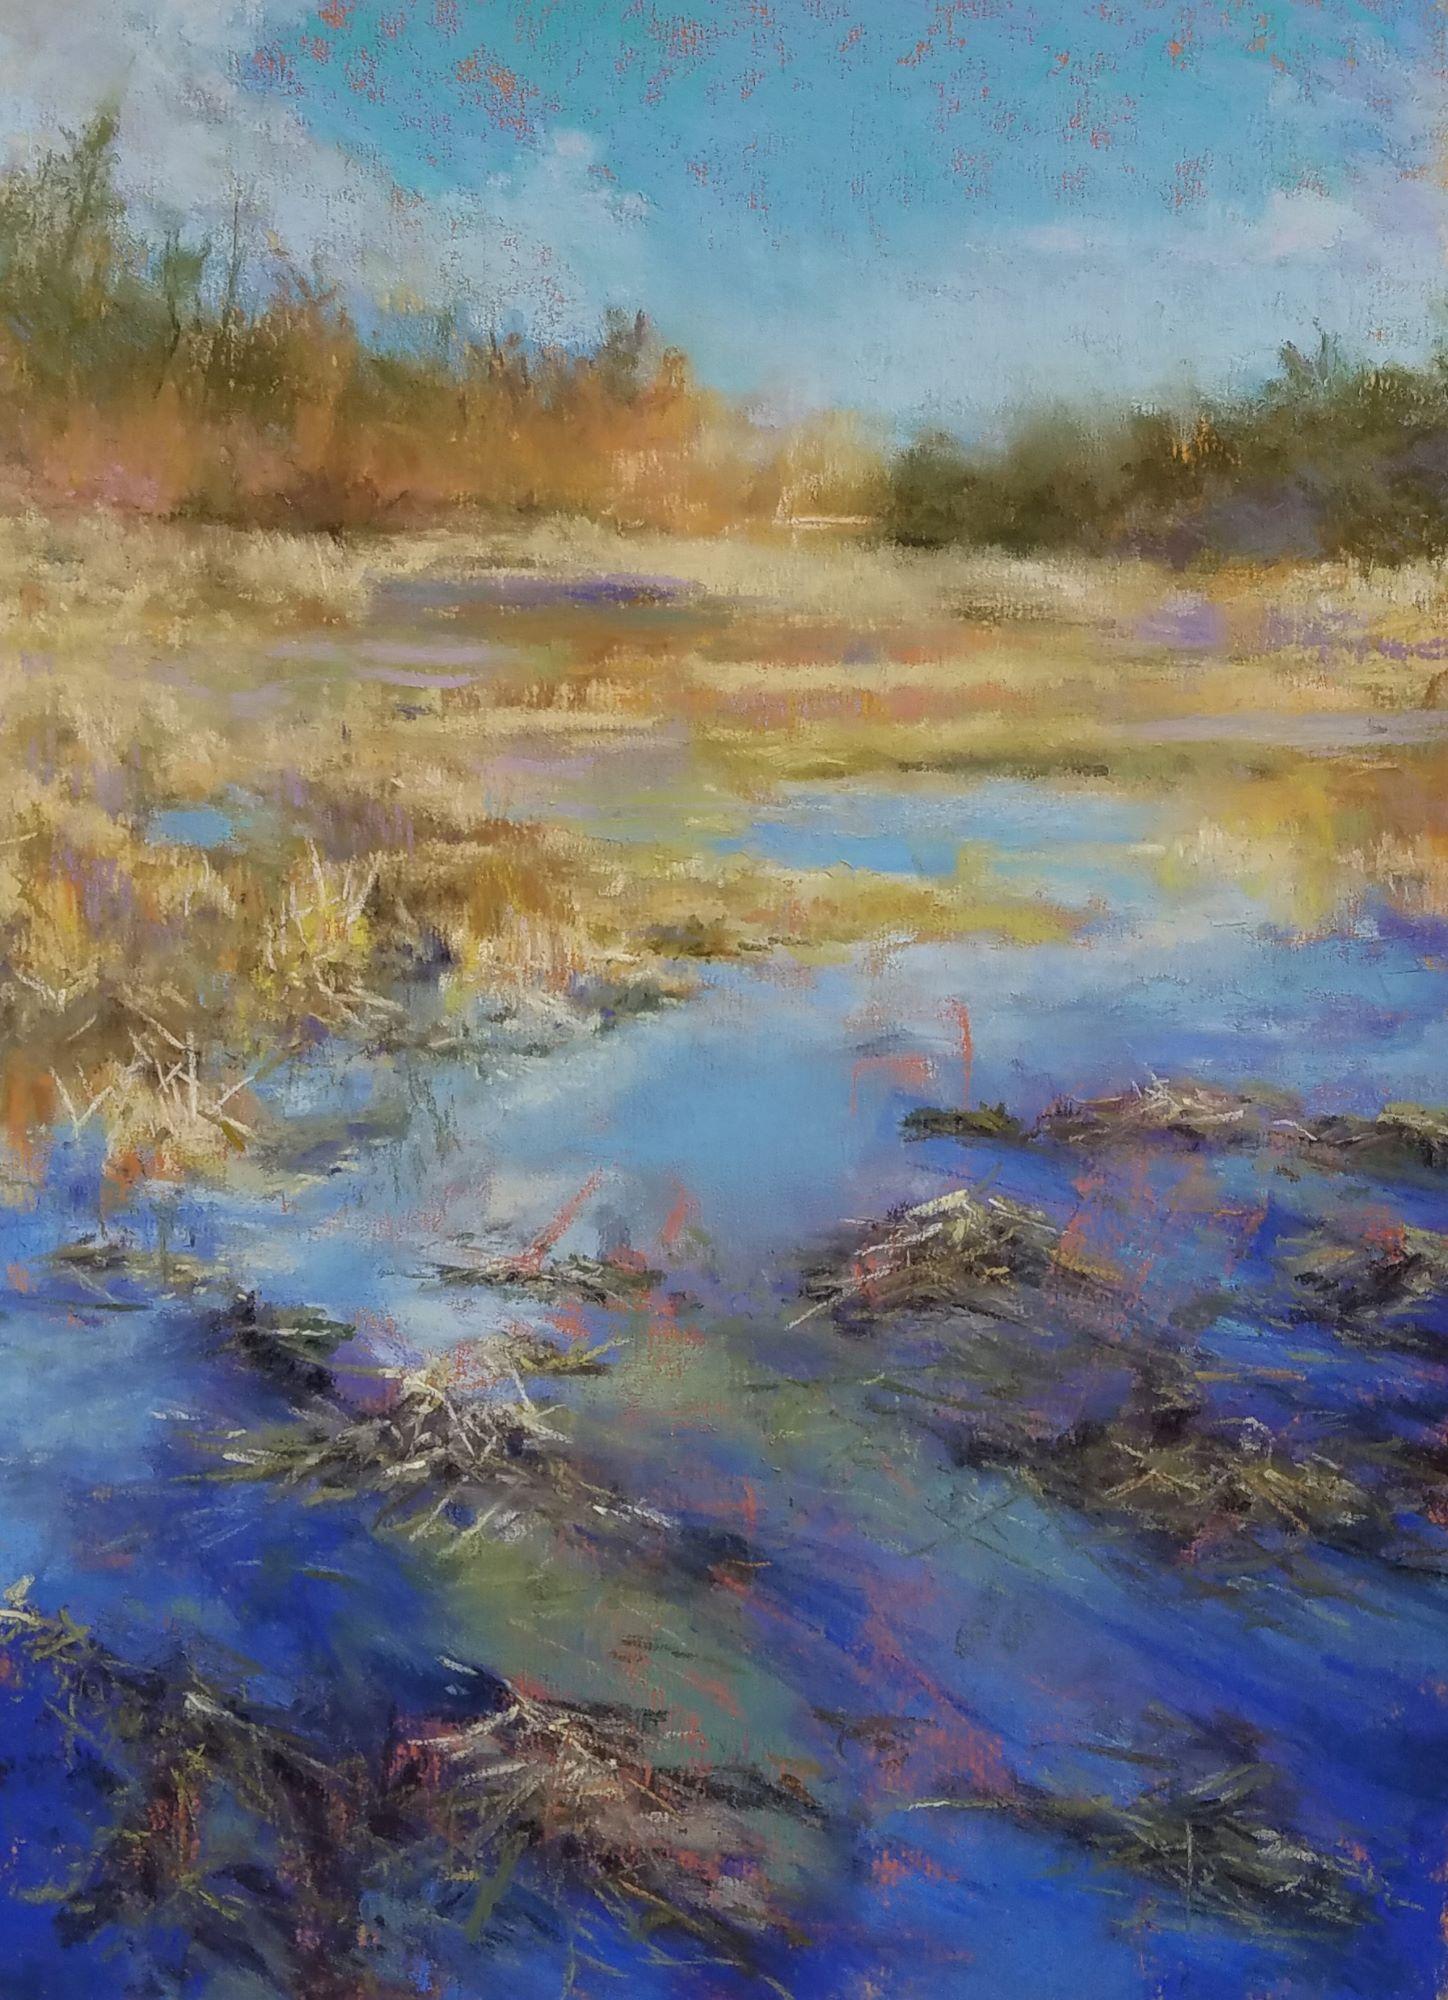 Recovering from Winter, Drawing, Pastels on Pastel Sandpaper - Art by Bob Palmerton